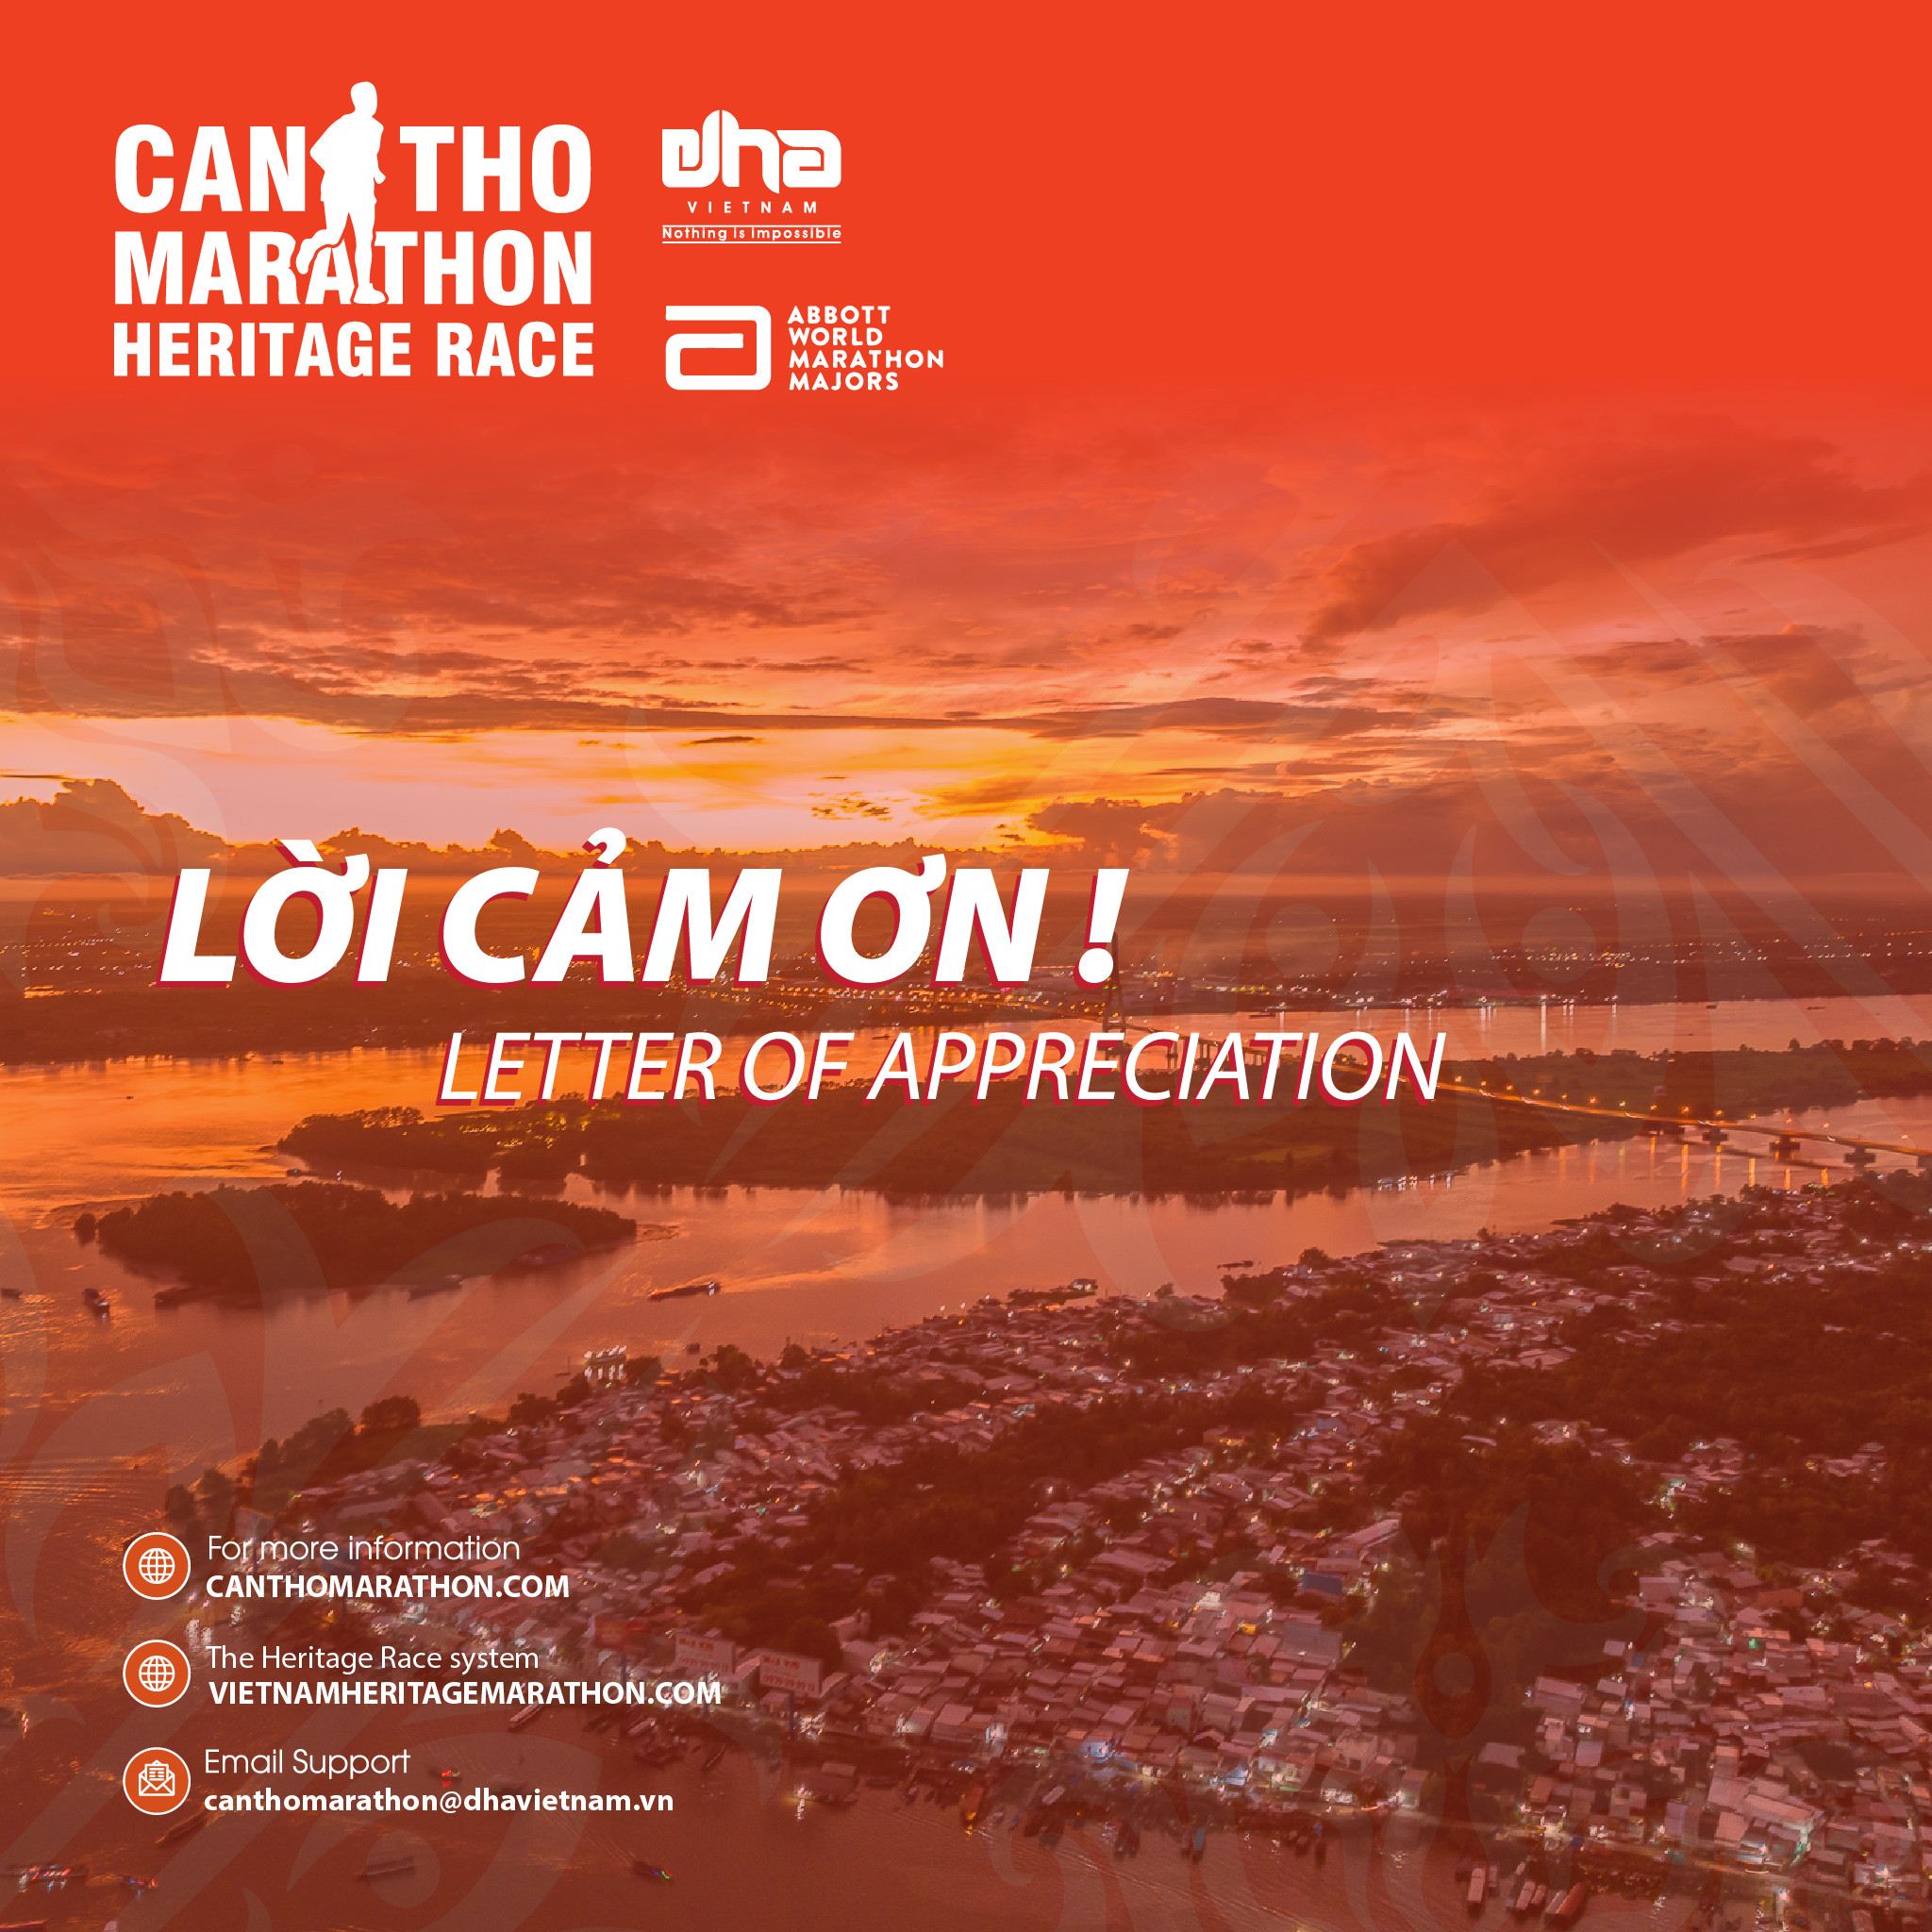 The Can Tho Marathon – A Heritage Race 2022: Letter Of Appreciation